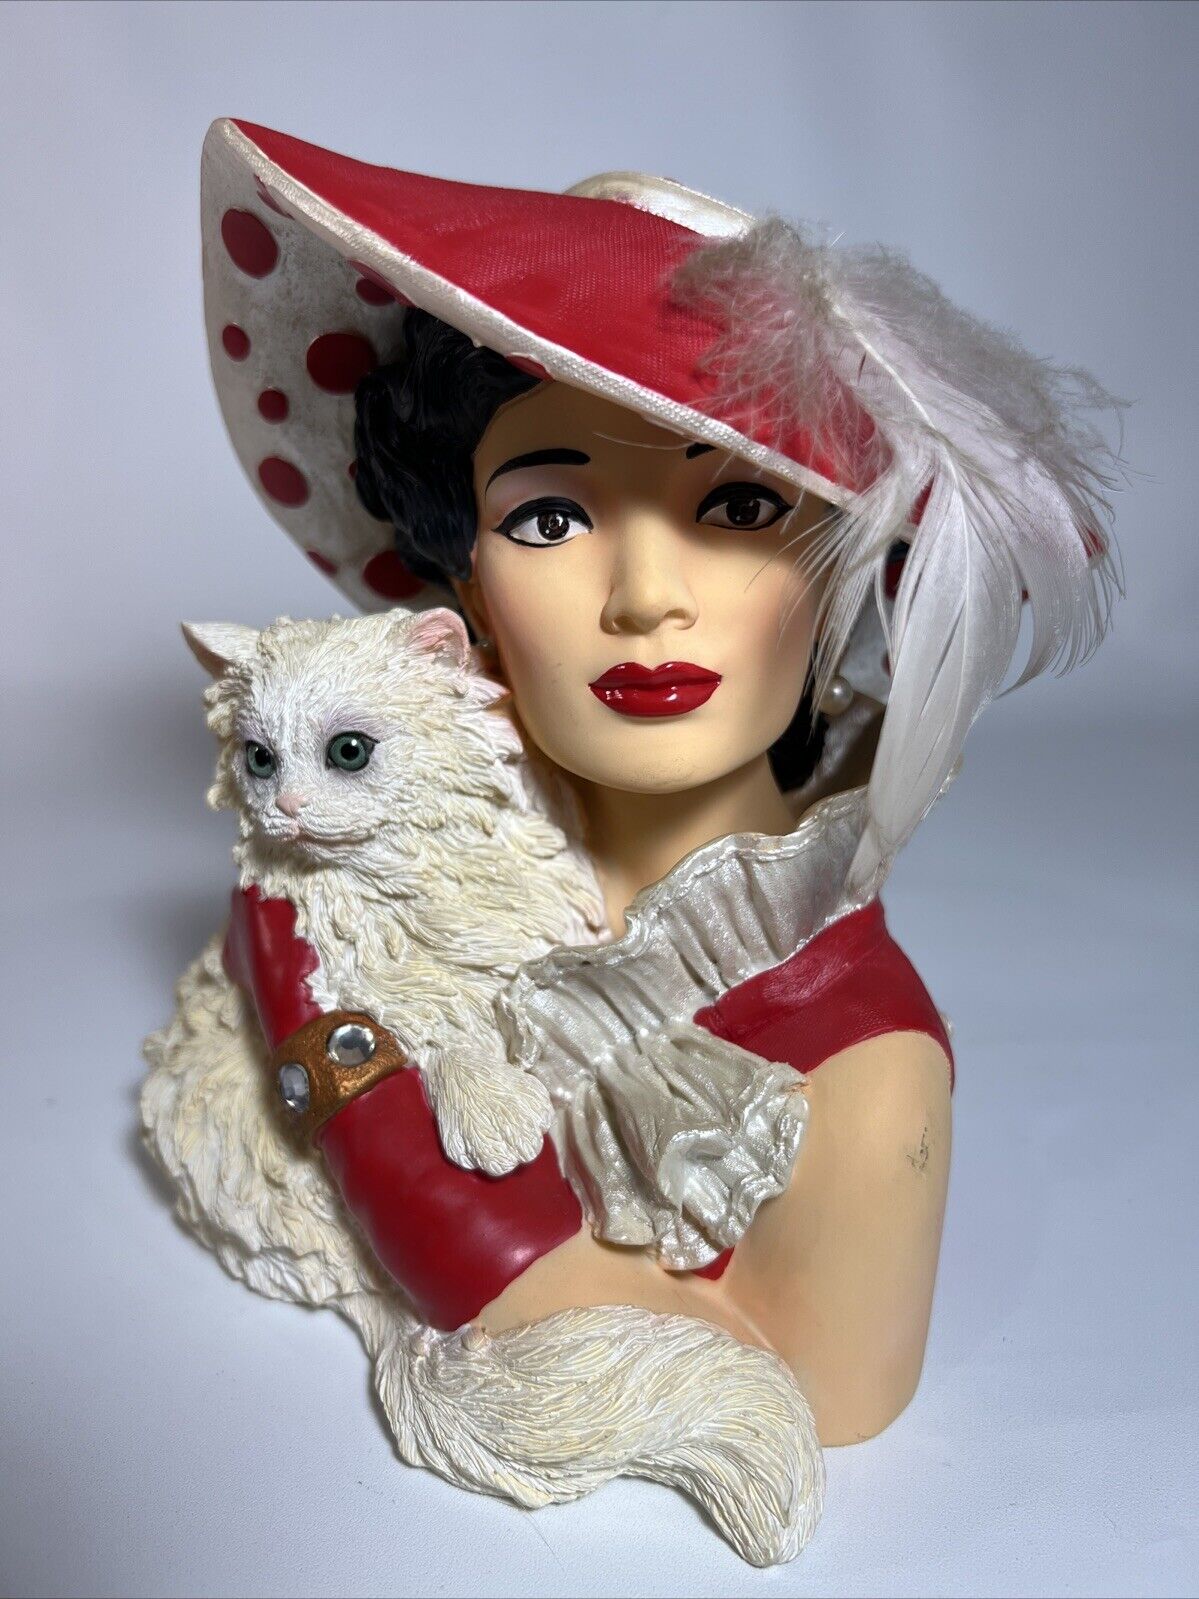 Cameo Girls Deluxe EMMA 1944 CAT'S MEOW Rare Limited Edition 500/1500